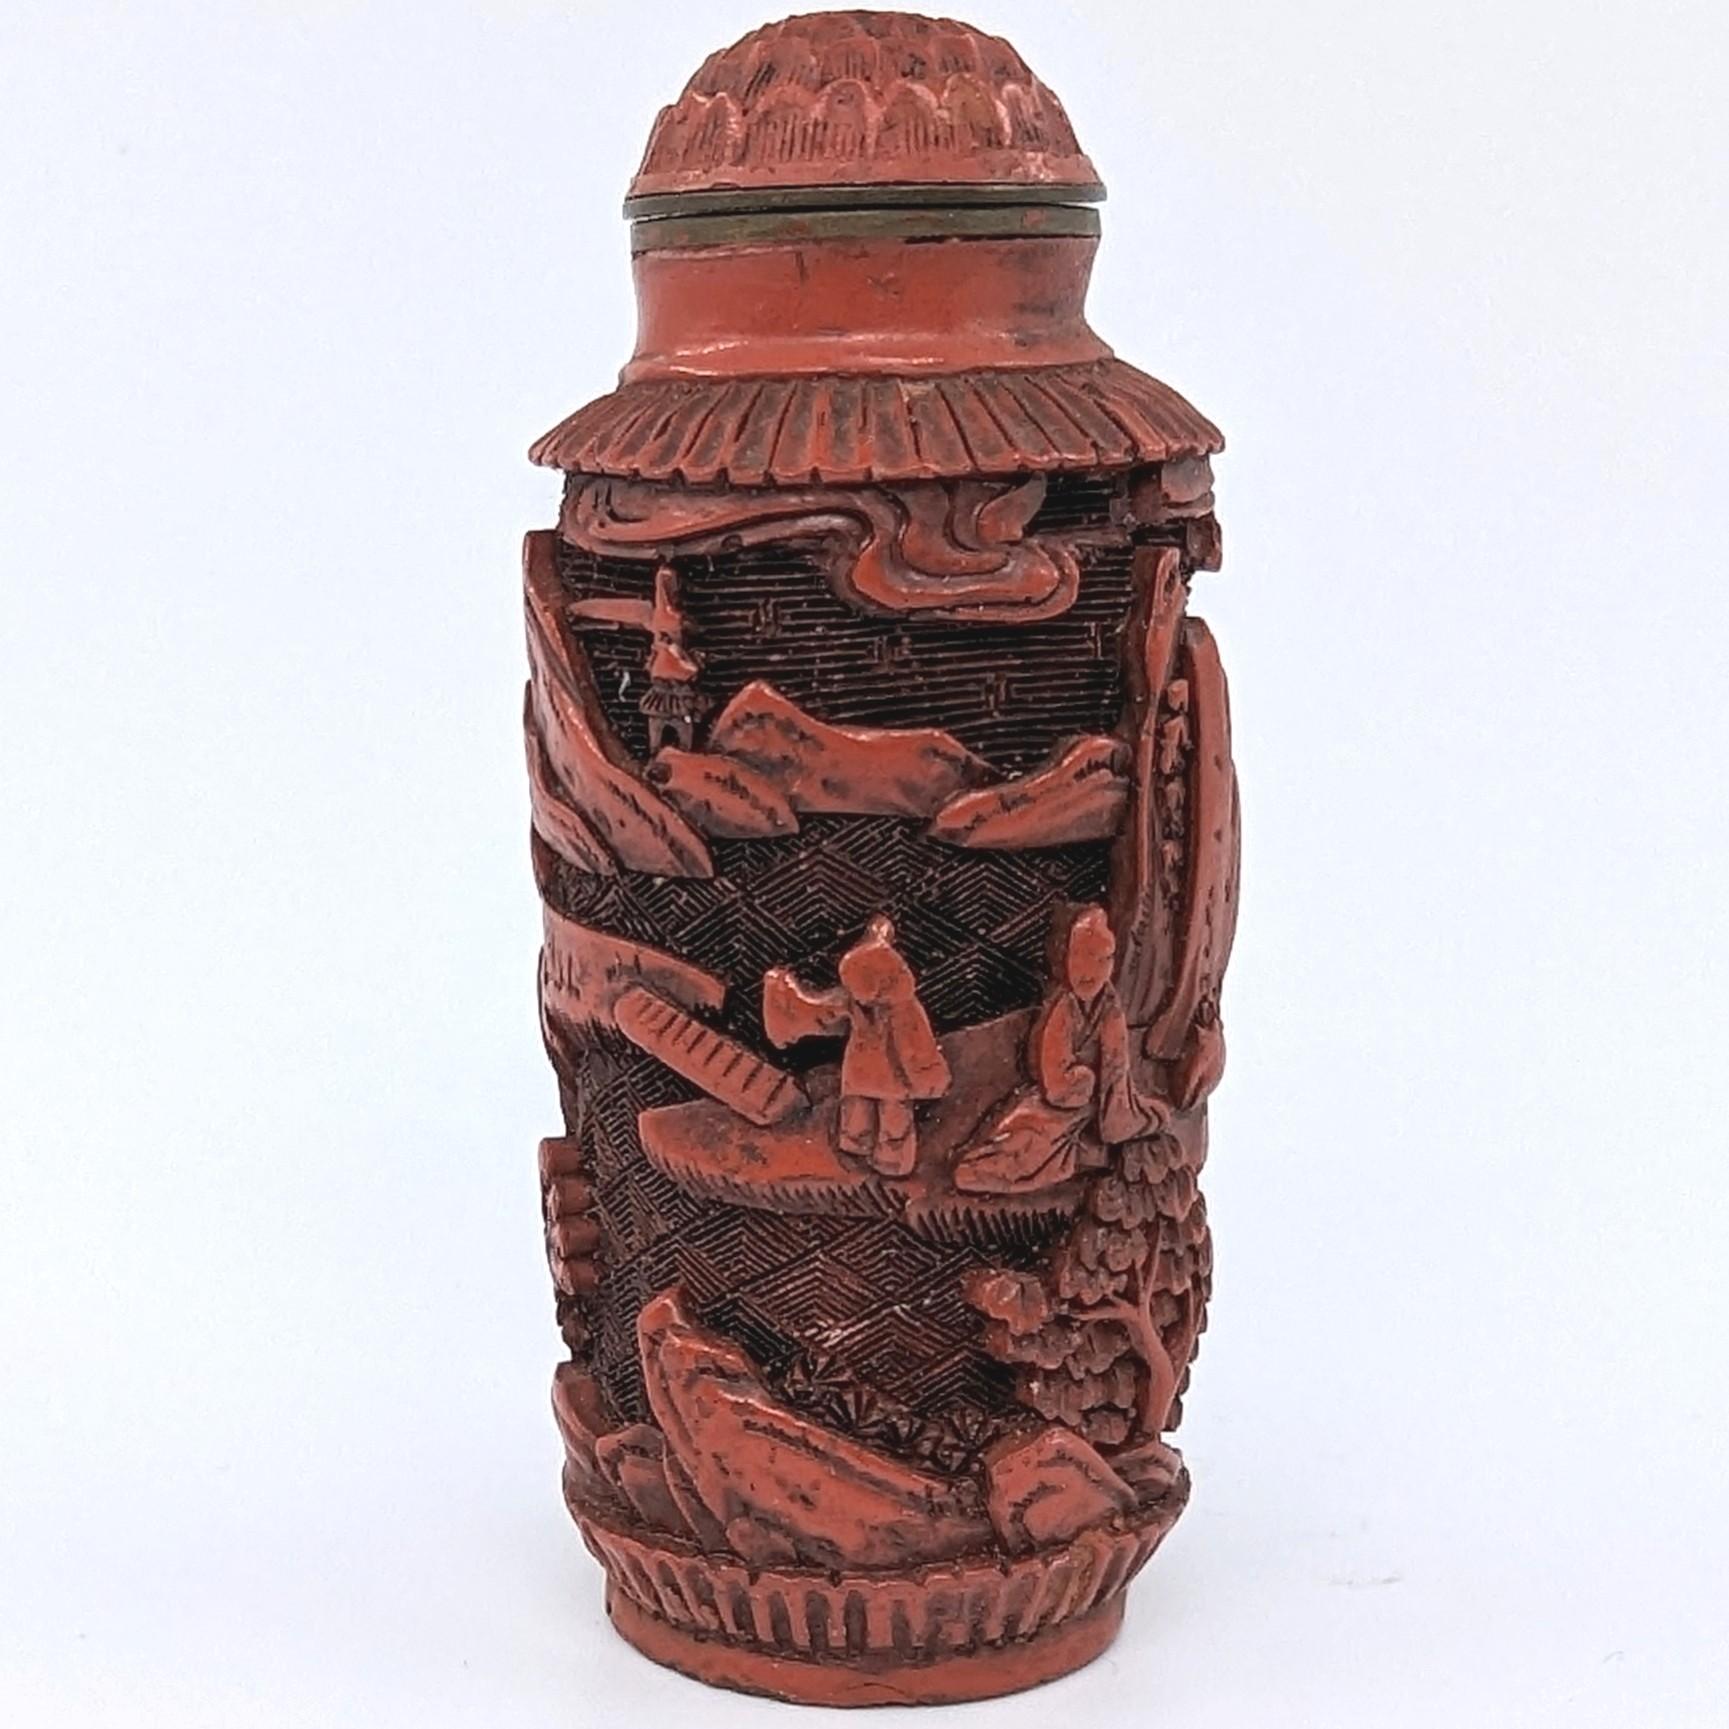 Antique Chinese red cinnabar lacquer snuff bottle, finely carved with a continuous landscape scene, original matching cinnabar stopper and 4 character Qing Qianlong mark to base

18-19c Qing Dynasty